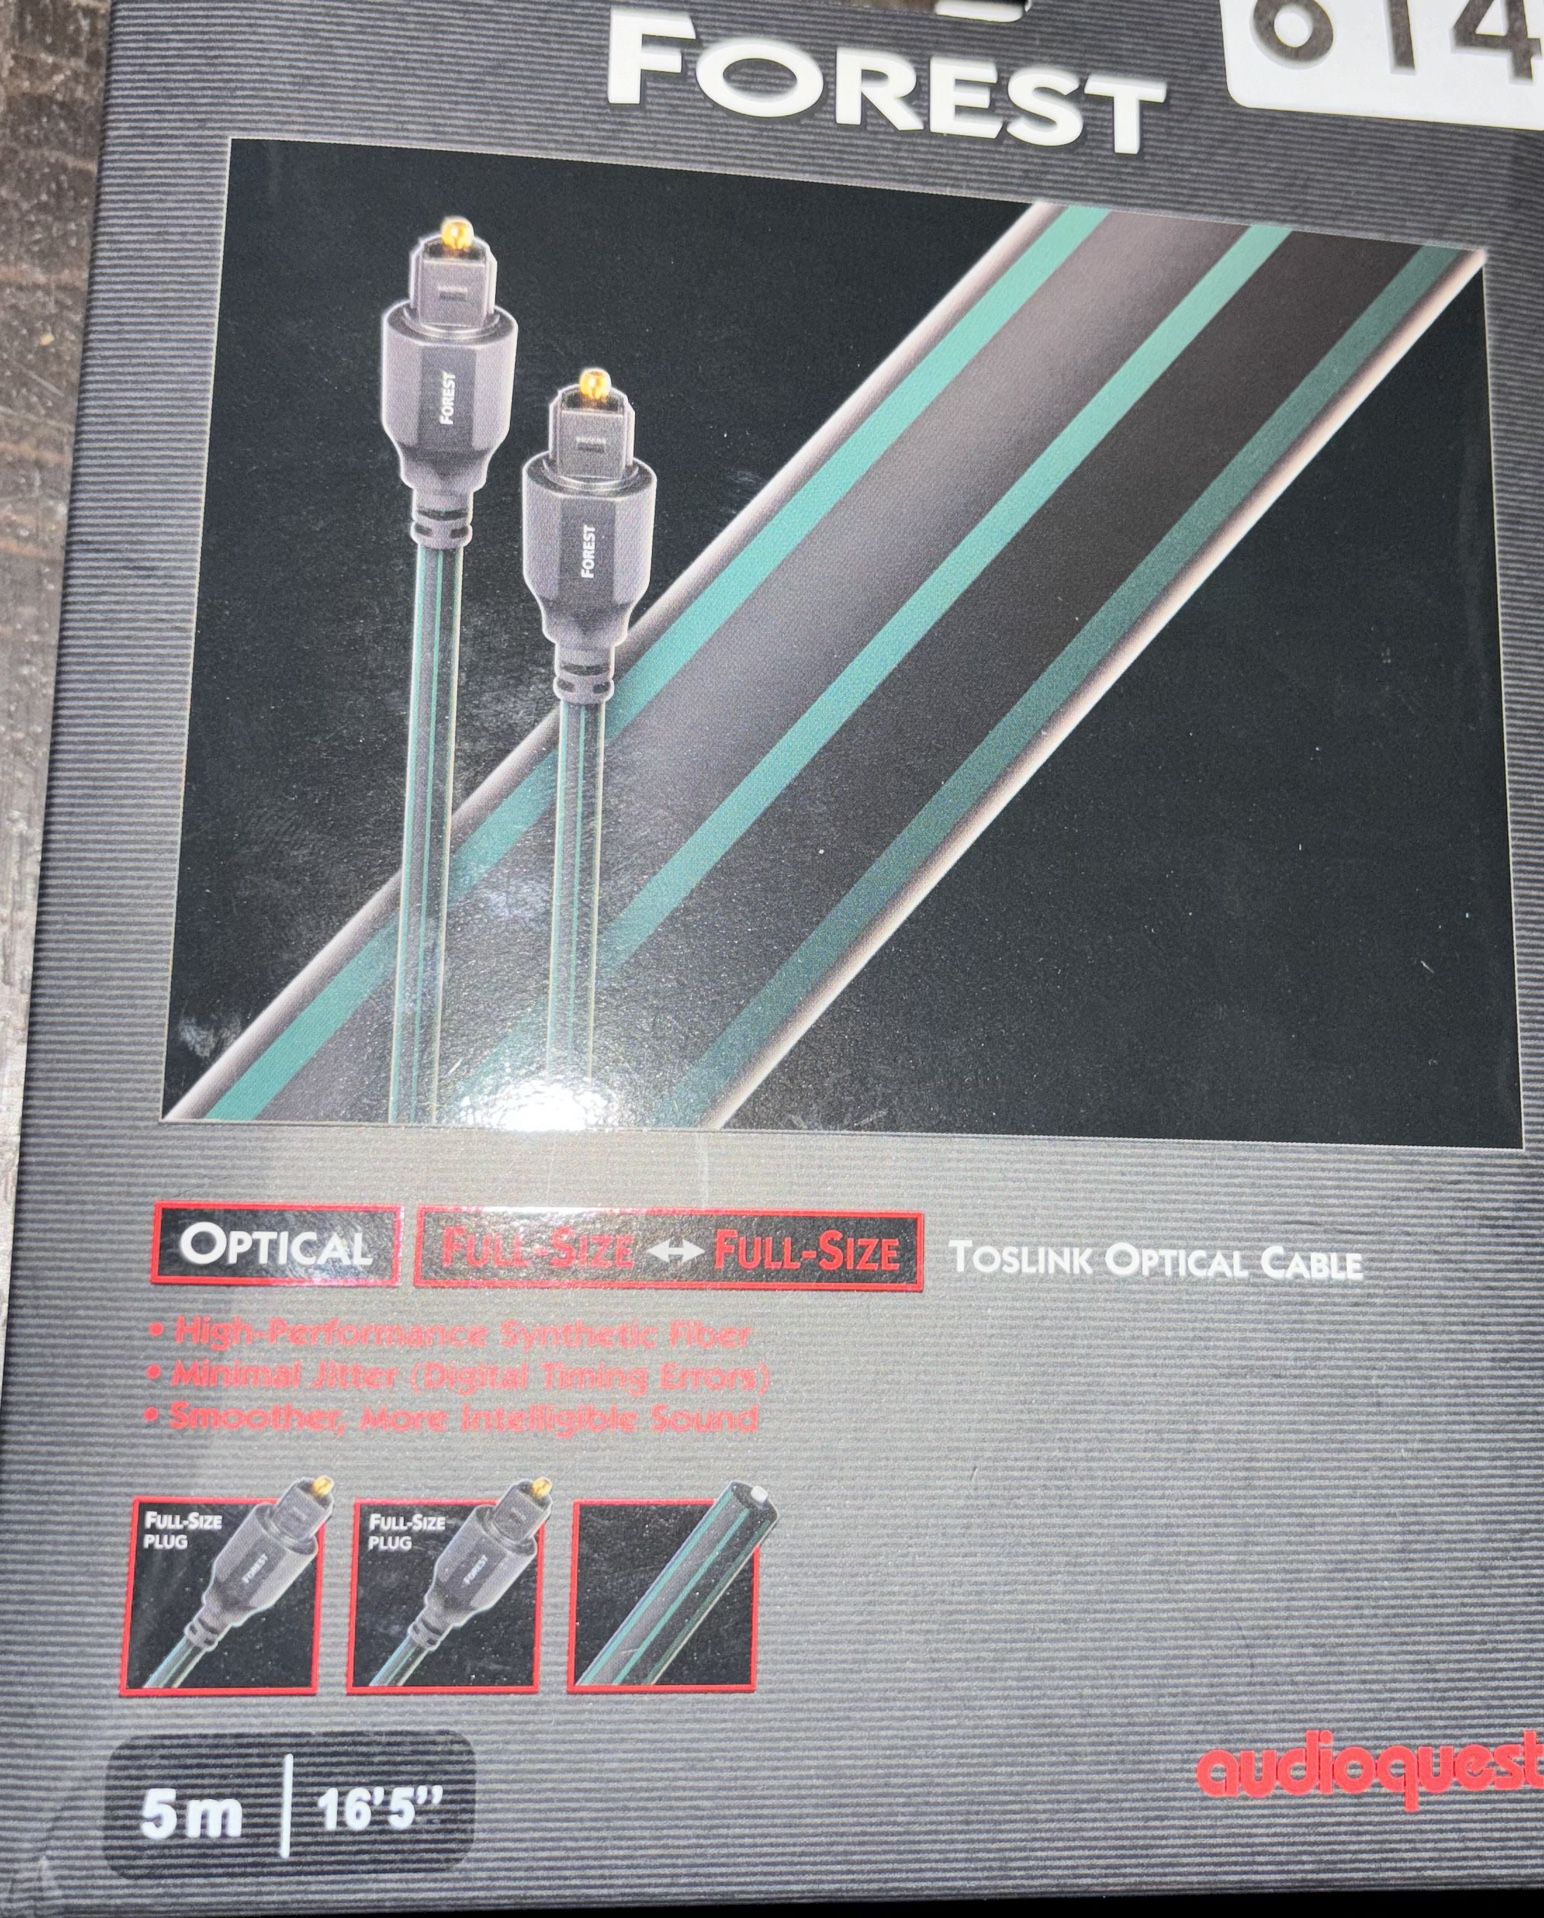 Audioquest 5m To slink Optical Cable Forest green Brand New